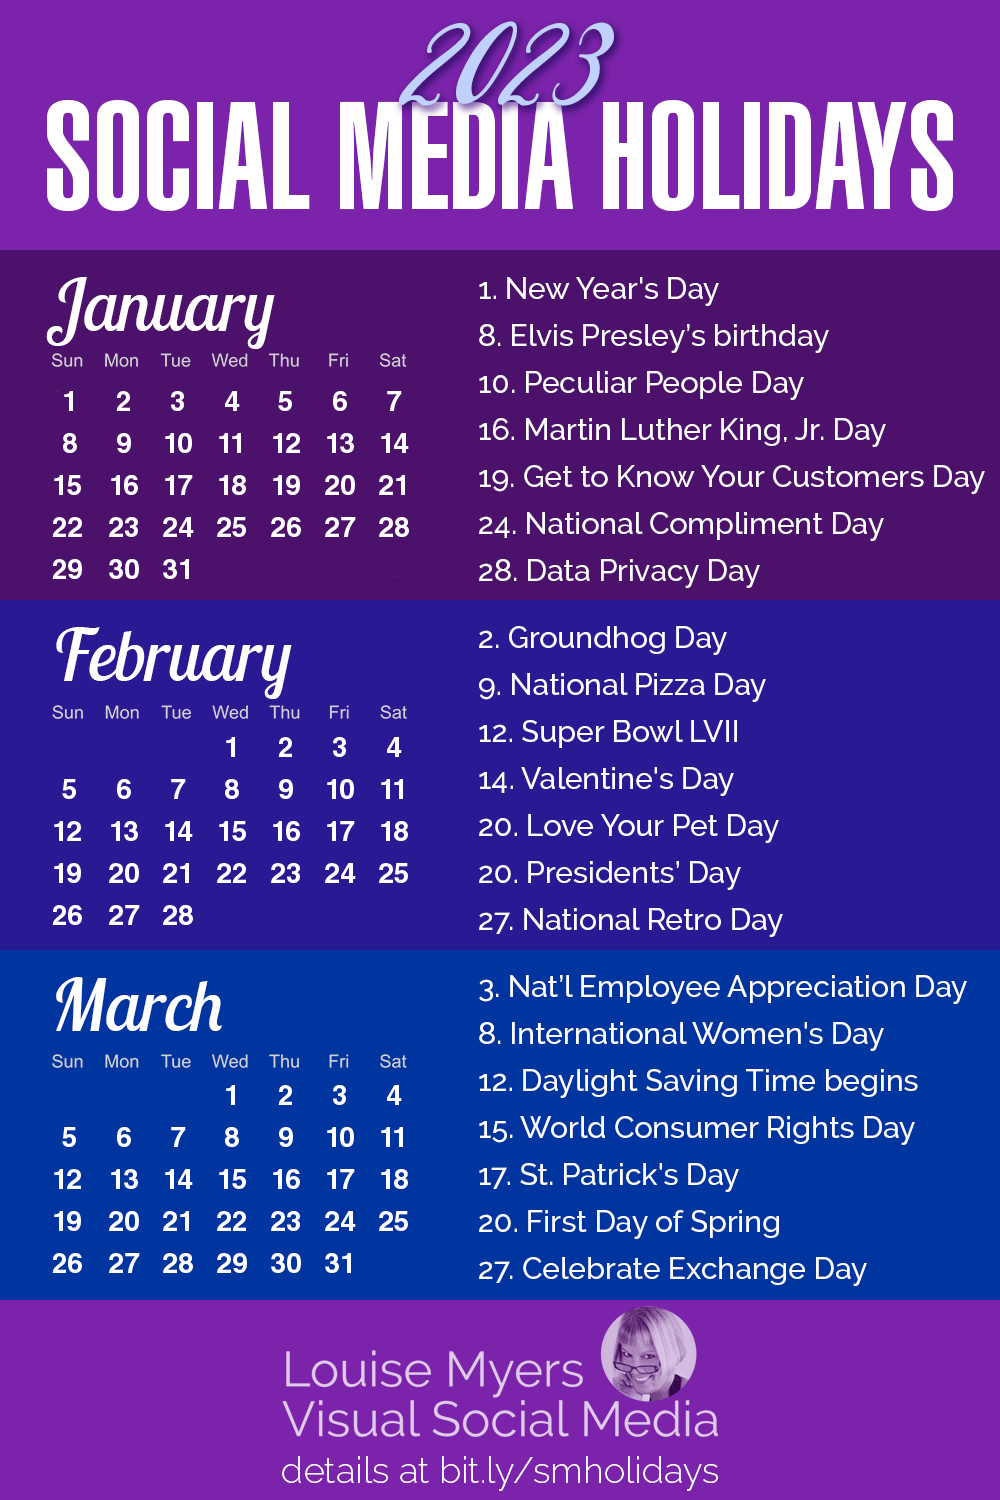 january, february, and march 2023 calendars with list of social media holidays.